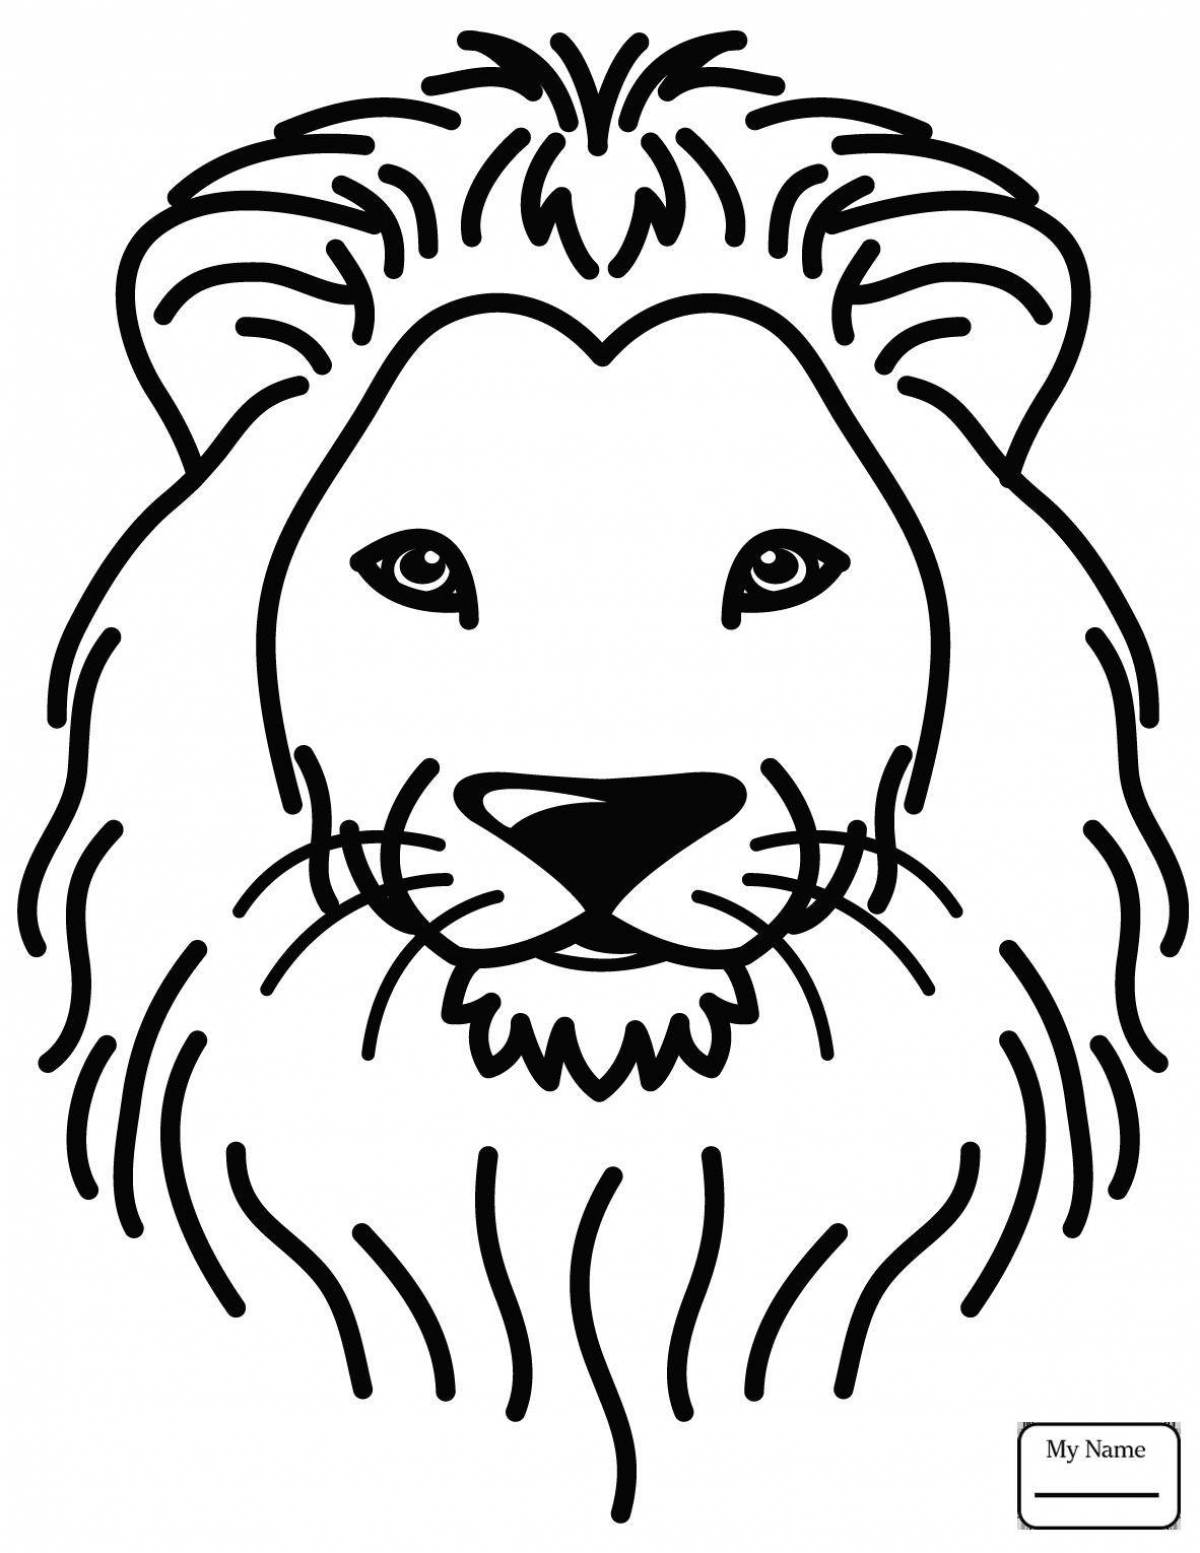 Coloring book shining muzzle of a lion